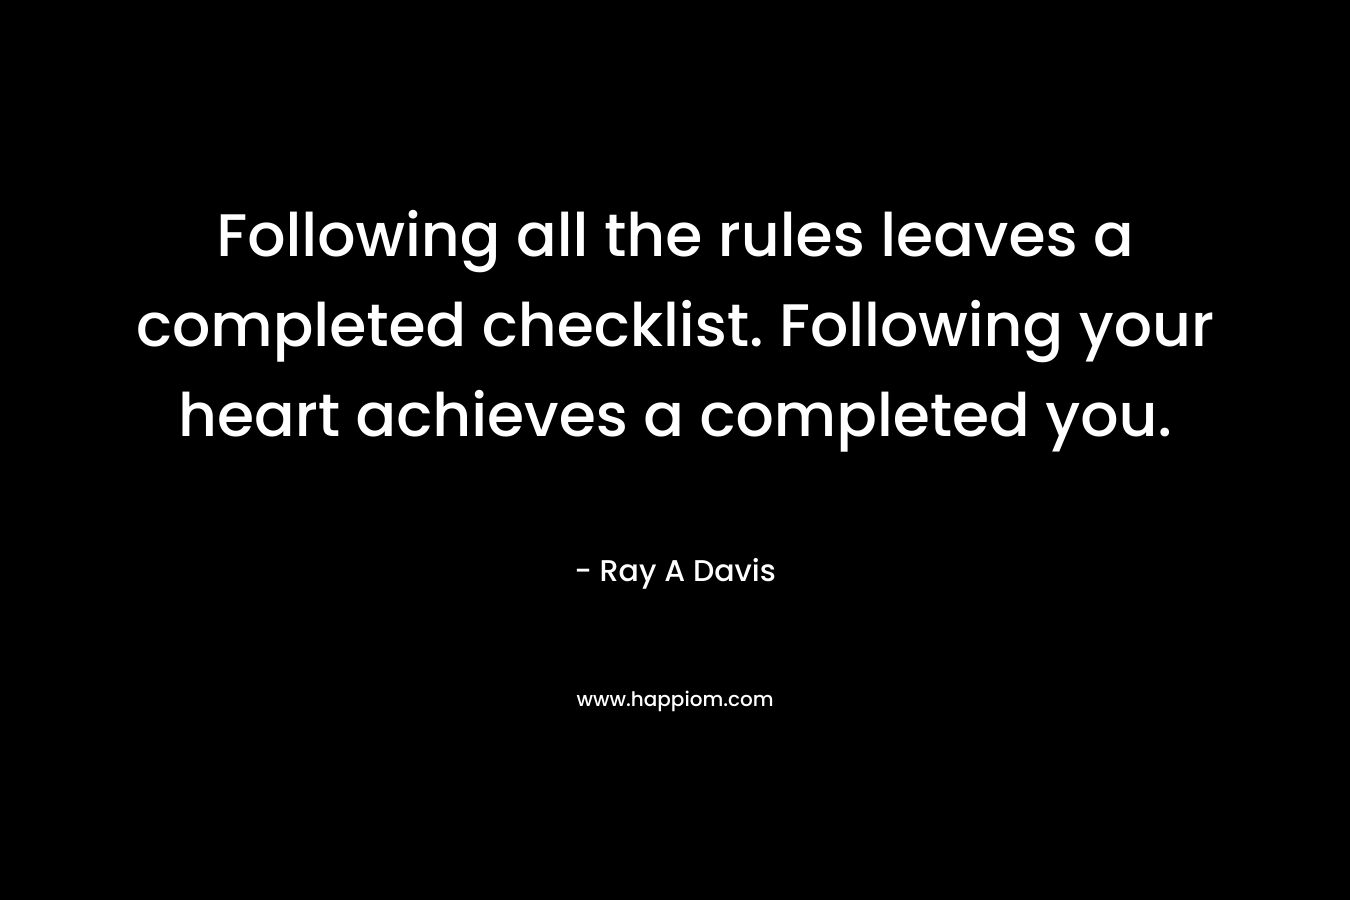 Following all the rules leaves a completed checklist. Following your heart achieves a completed you. – Ray A Davis